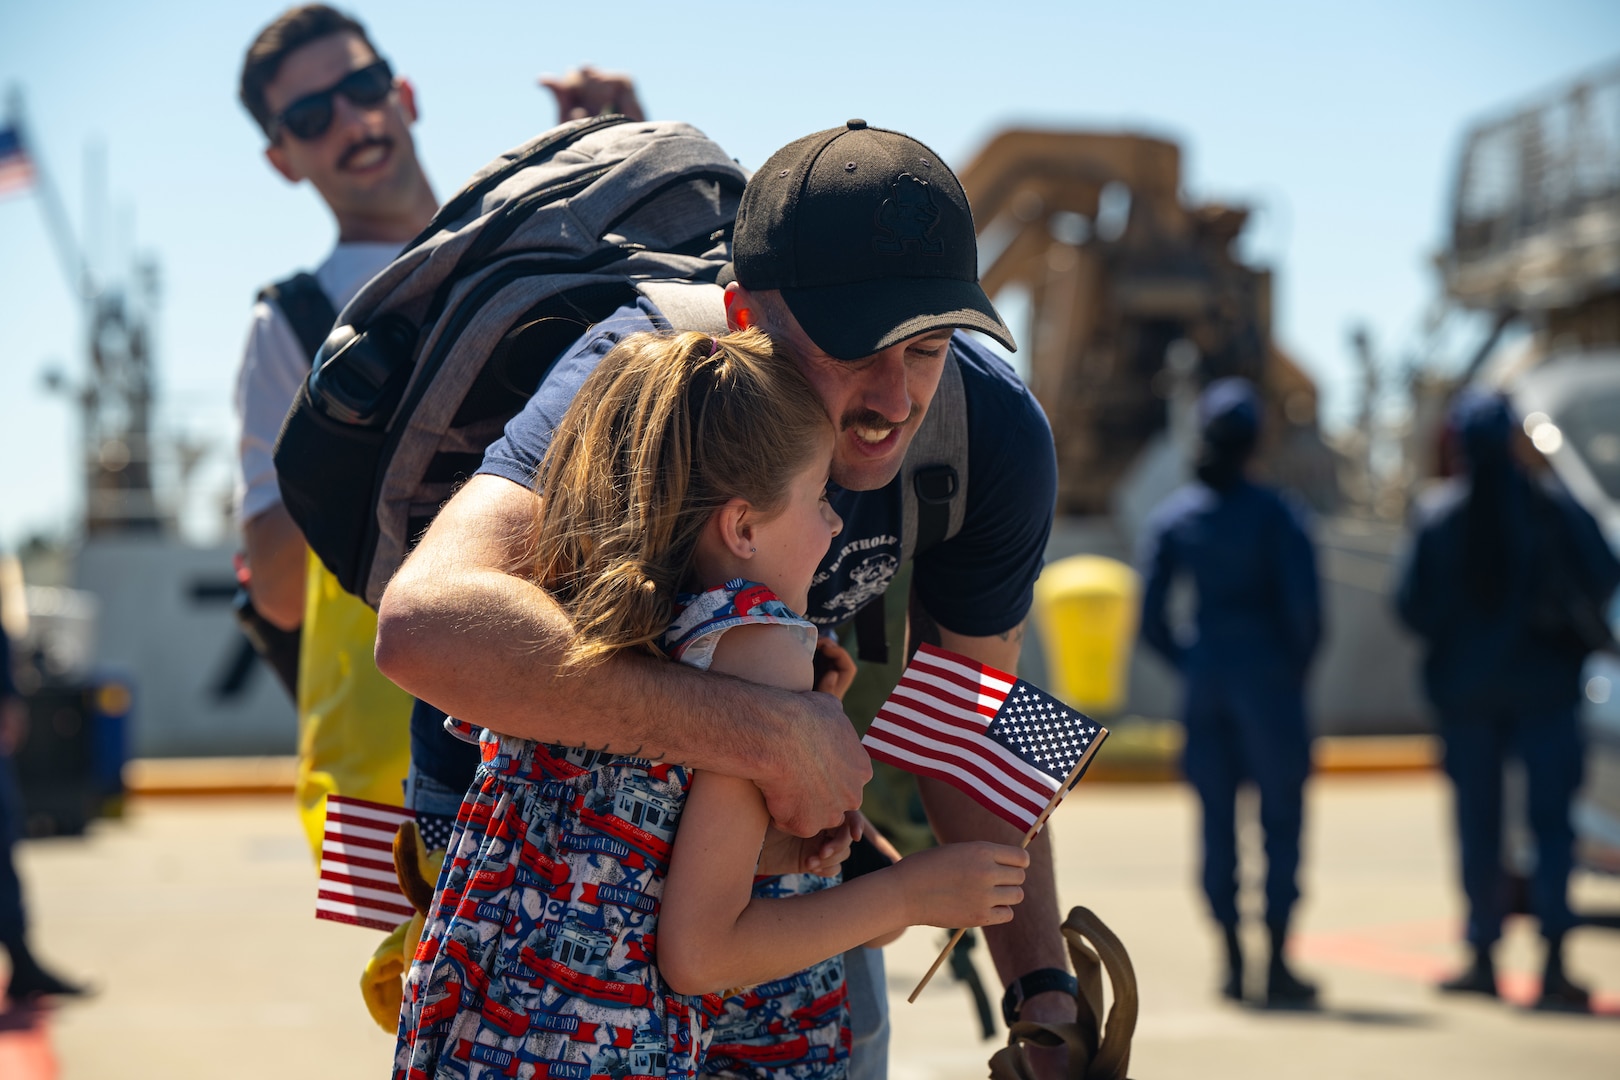 A crew member assigned to the Coast Guard Cutter Bertholf (WMSL 750) greets his family at the cutter's return to home port on Coast Guard Base Alameda, Calif., following a 98-day patrol in the Indo-Pacific region, April 8, 2024. The U.S. Coast Guard has operated in the Indo-Pacific for more than 150 years, and the Service is increasing efforts through targeted patrols with our National Security Cutters, Fast Response Cutters, and other activities conducted in support of Coast Guard missions to enhance our partnerships. (U.S. Coast Guard Photo by Petty Officer 3rd Class Hunter Schnabel)